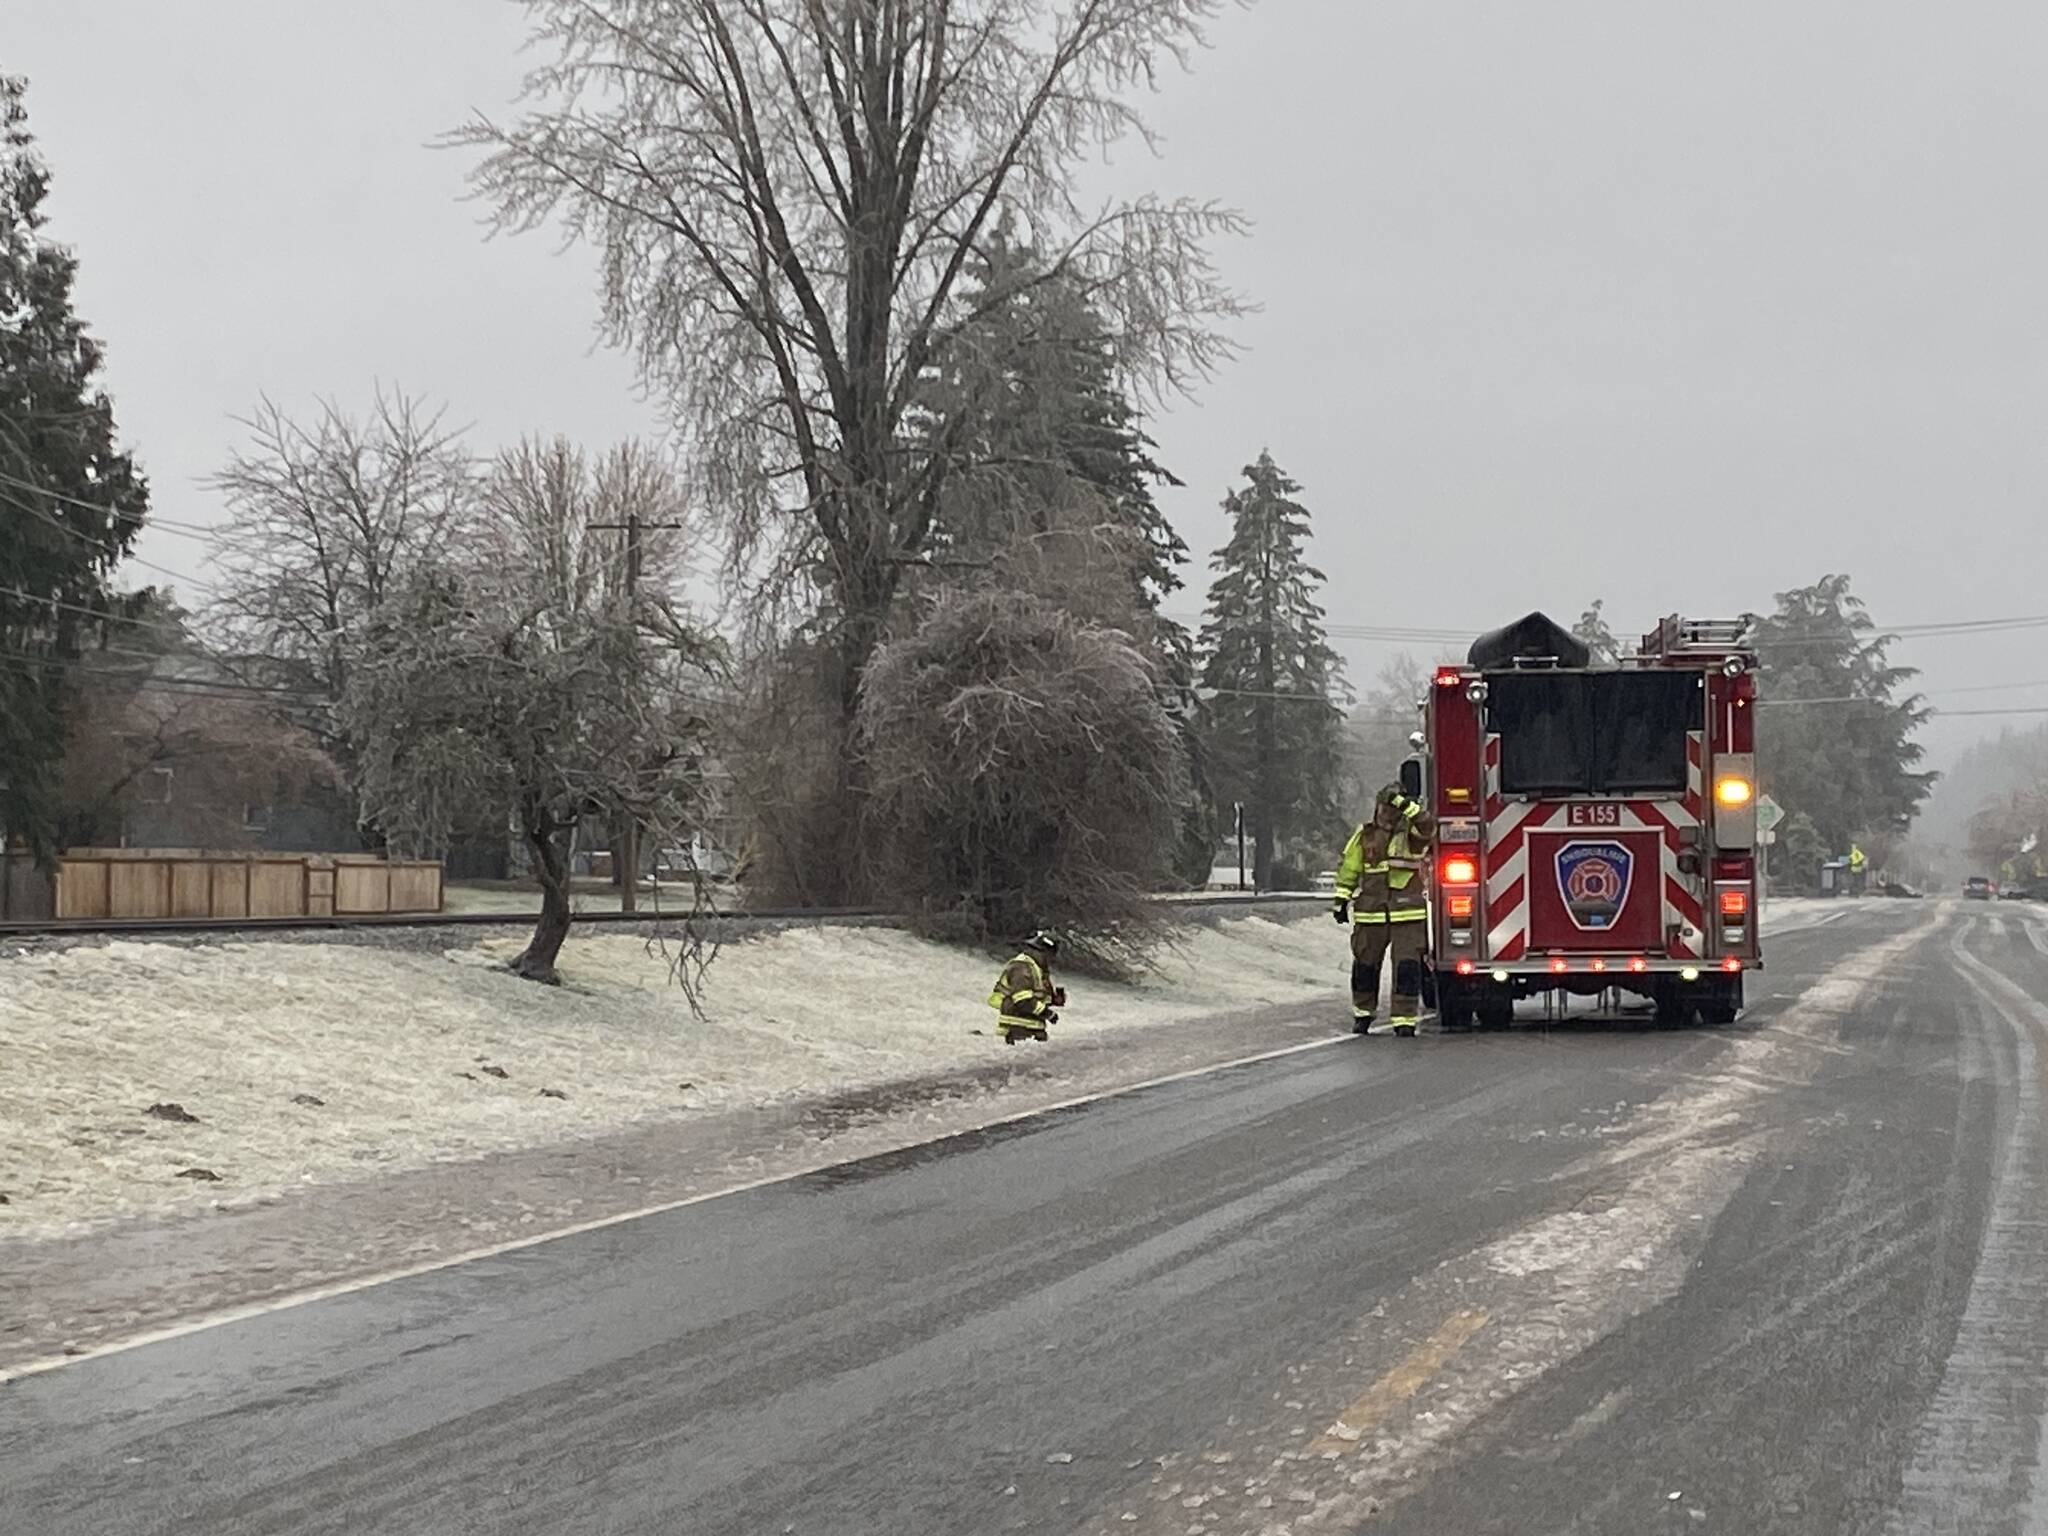 Snoqualmie firefighters respond to snapping trees due to heavy ice. (Photo by William Shaw/Sound Publishing)